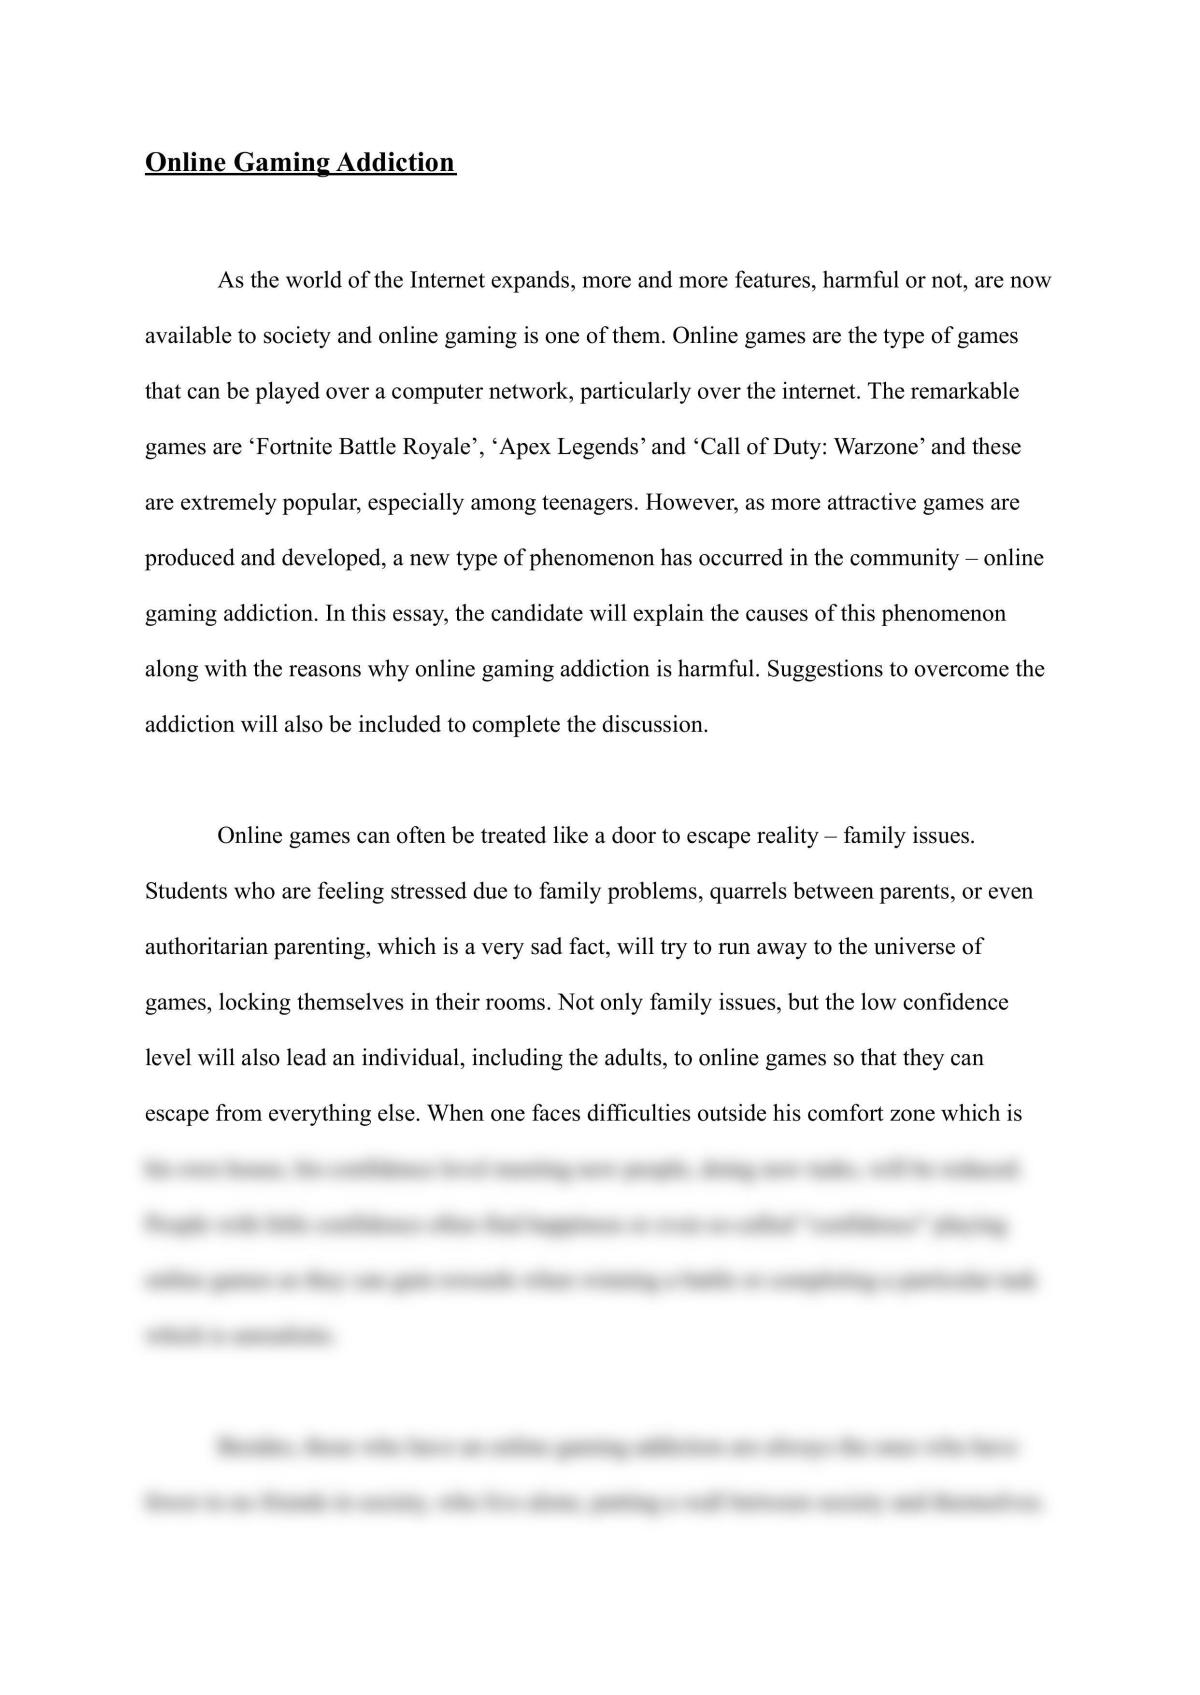 example essay about online games